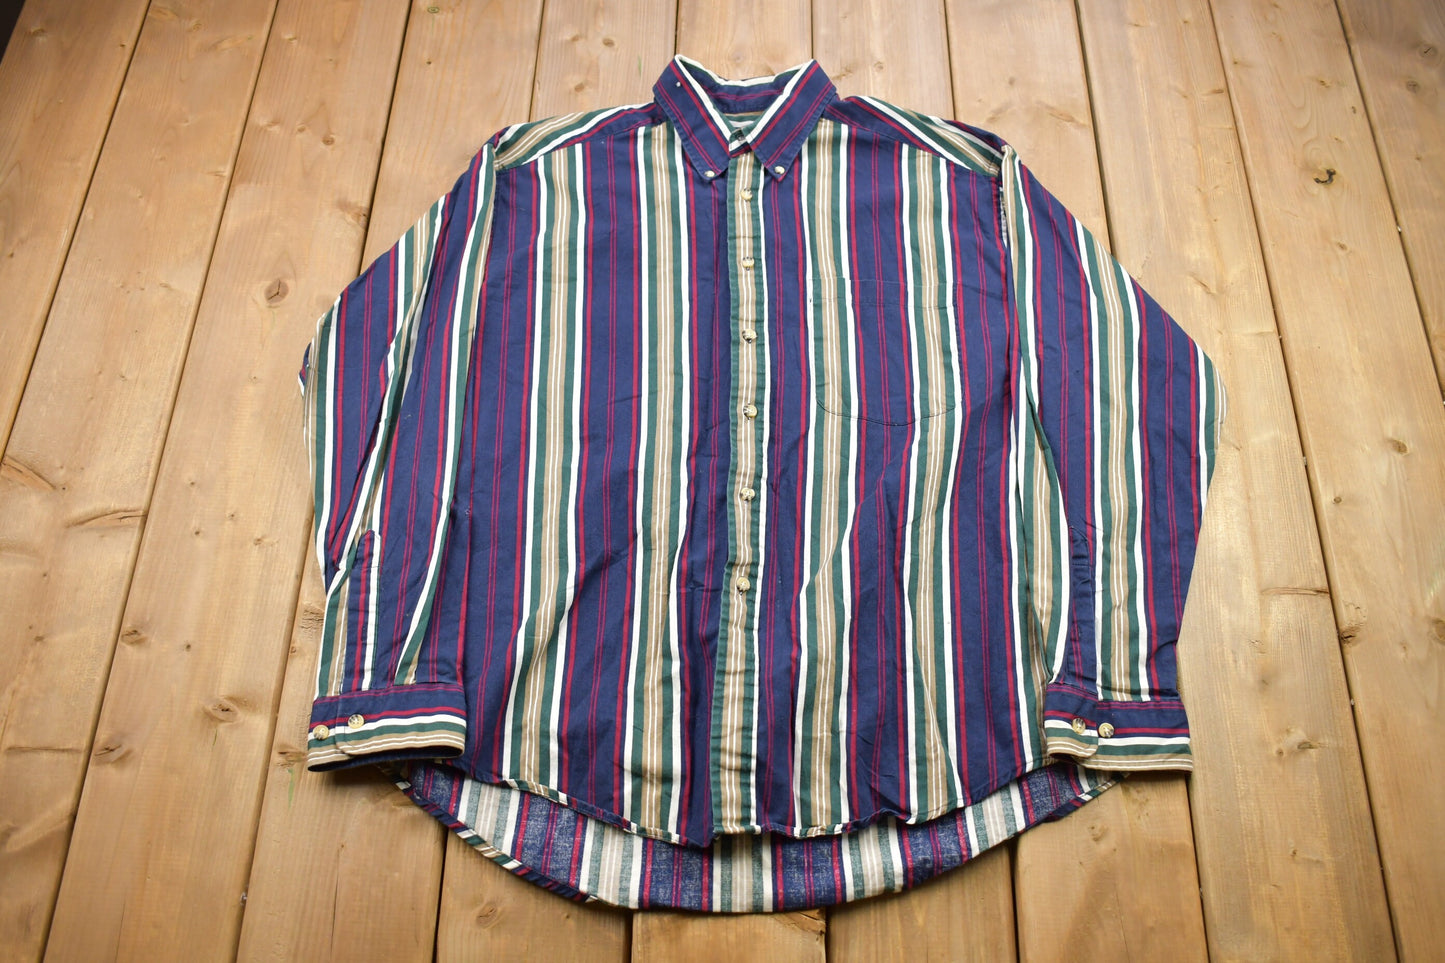 Vintage 1990s Striped Button Up Shirt / 1990s Button Up / Vintage Flannel / Basic Button Up